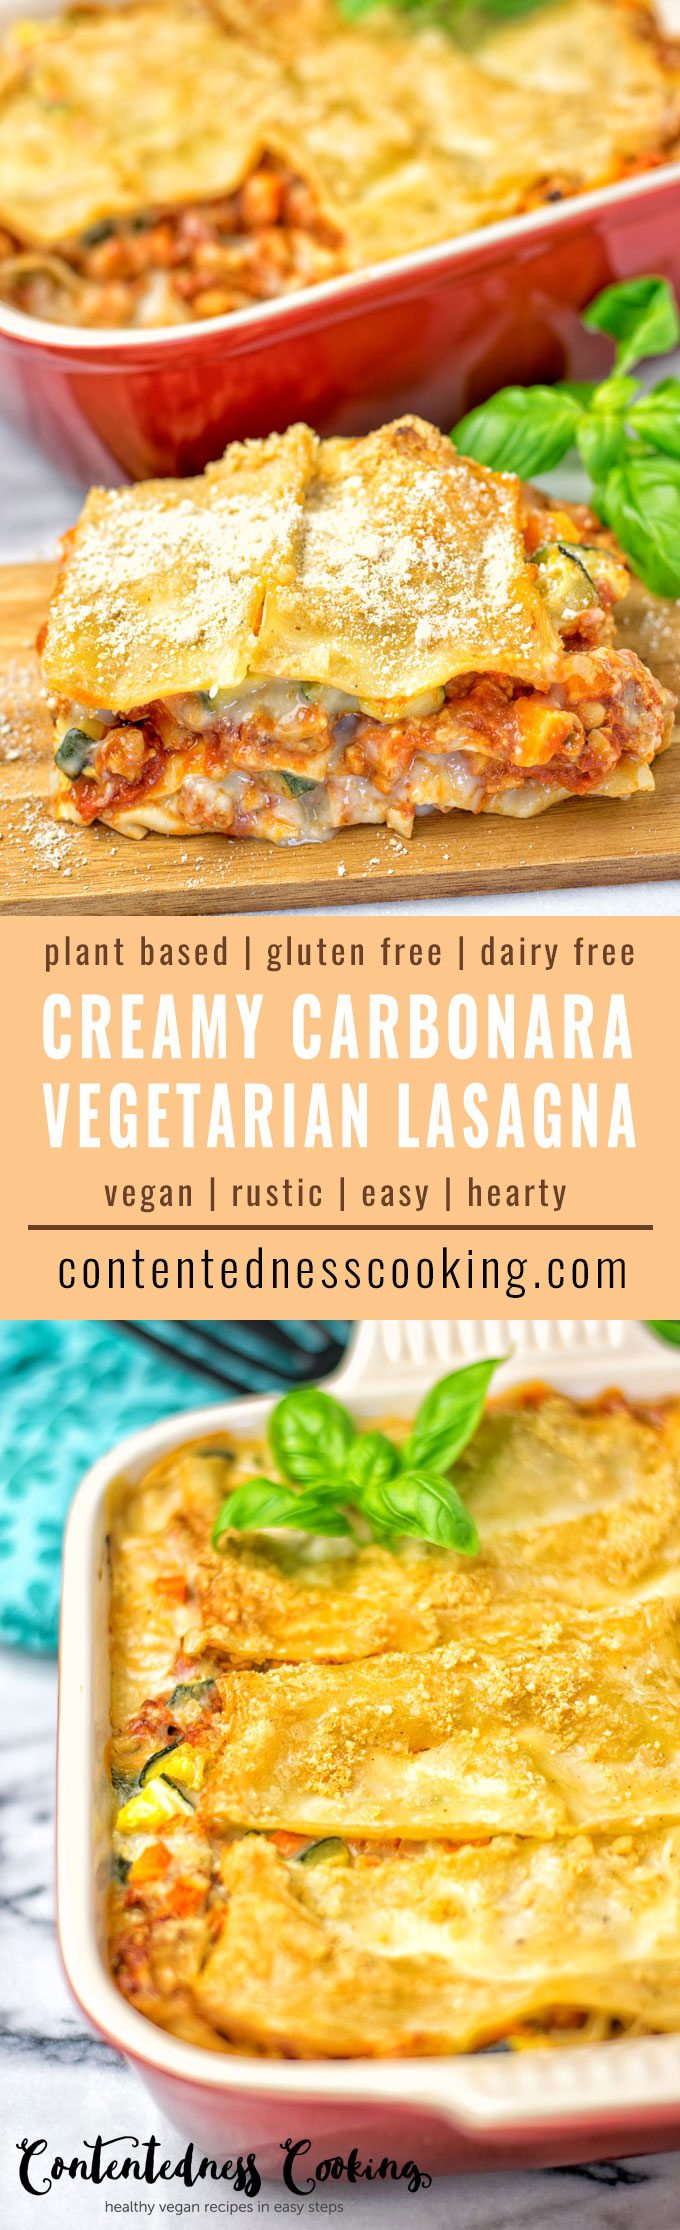 Collage of two pictures of the Creamy Carbonara Vegetarian Lasagna with recipe title text.